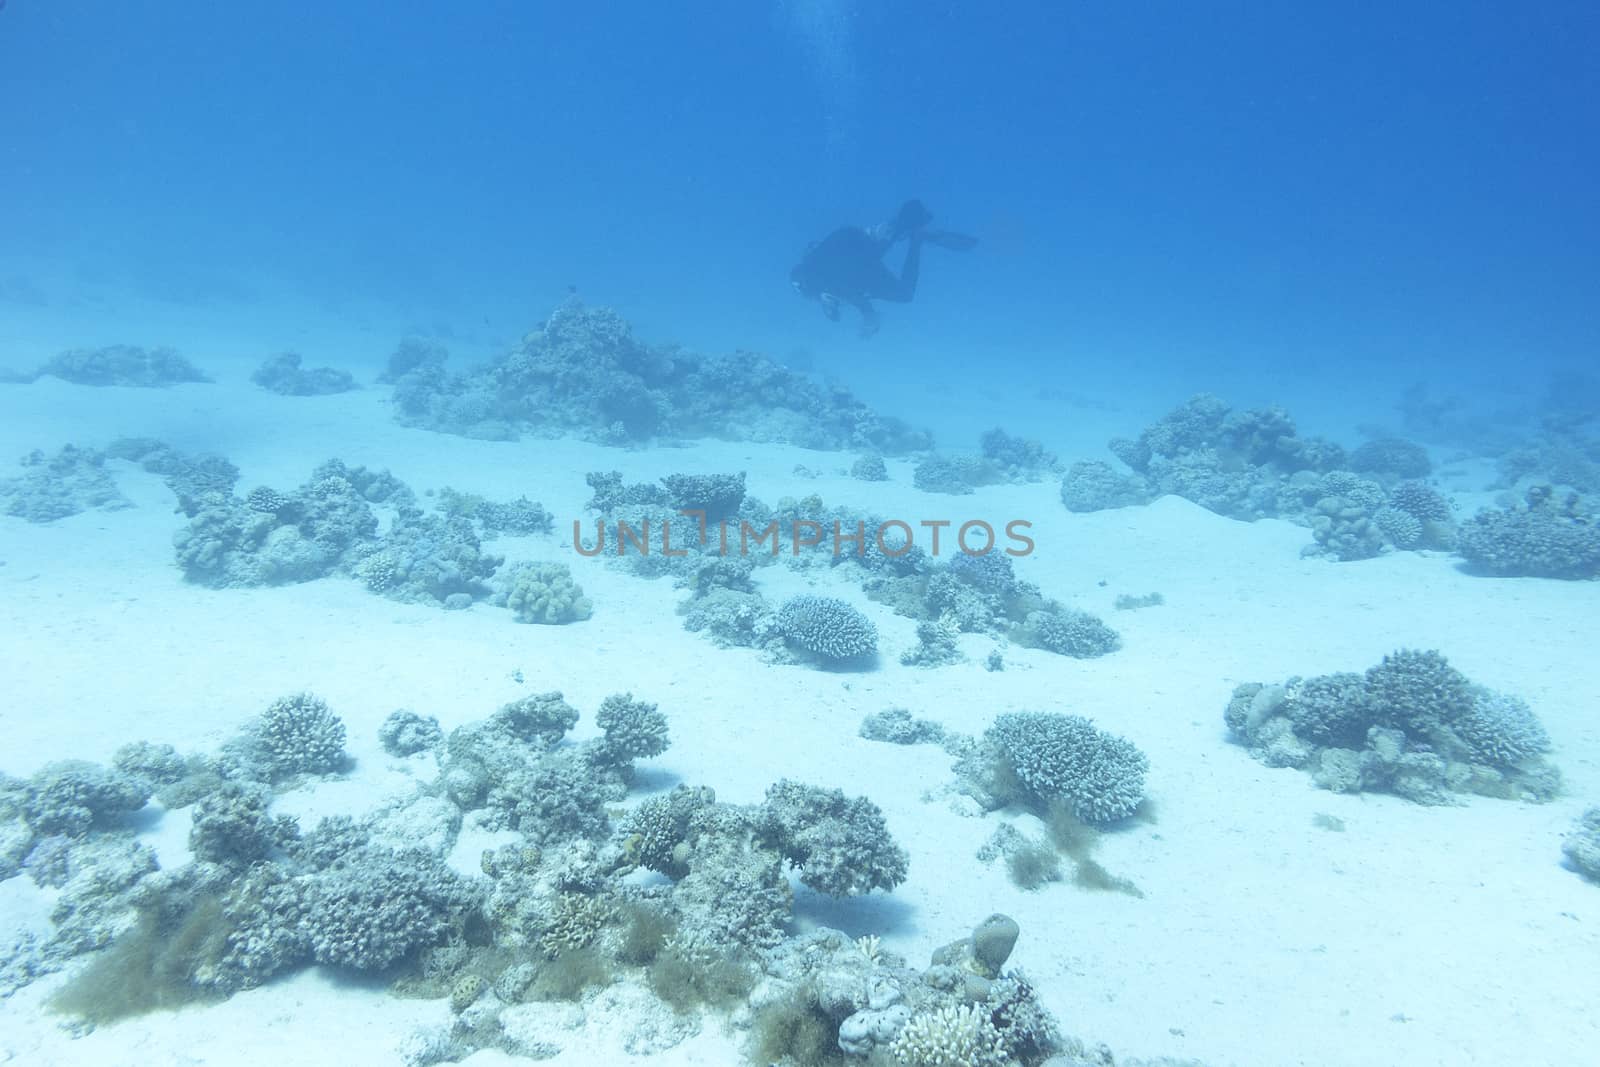 Bottom of tropical sea with coral reef and diver, underwater